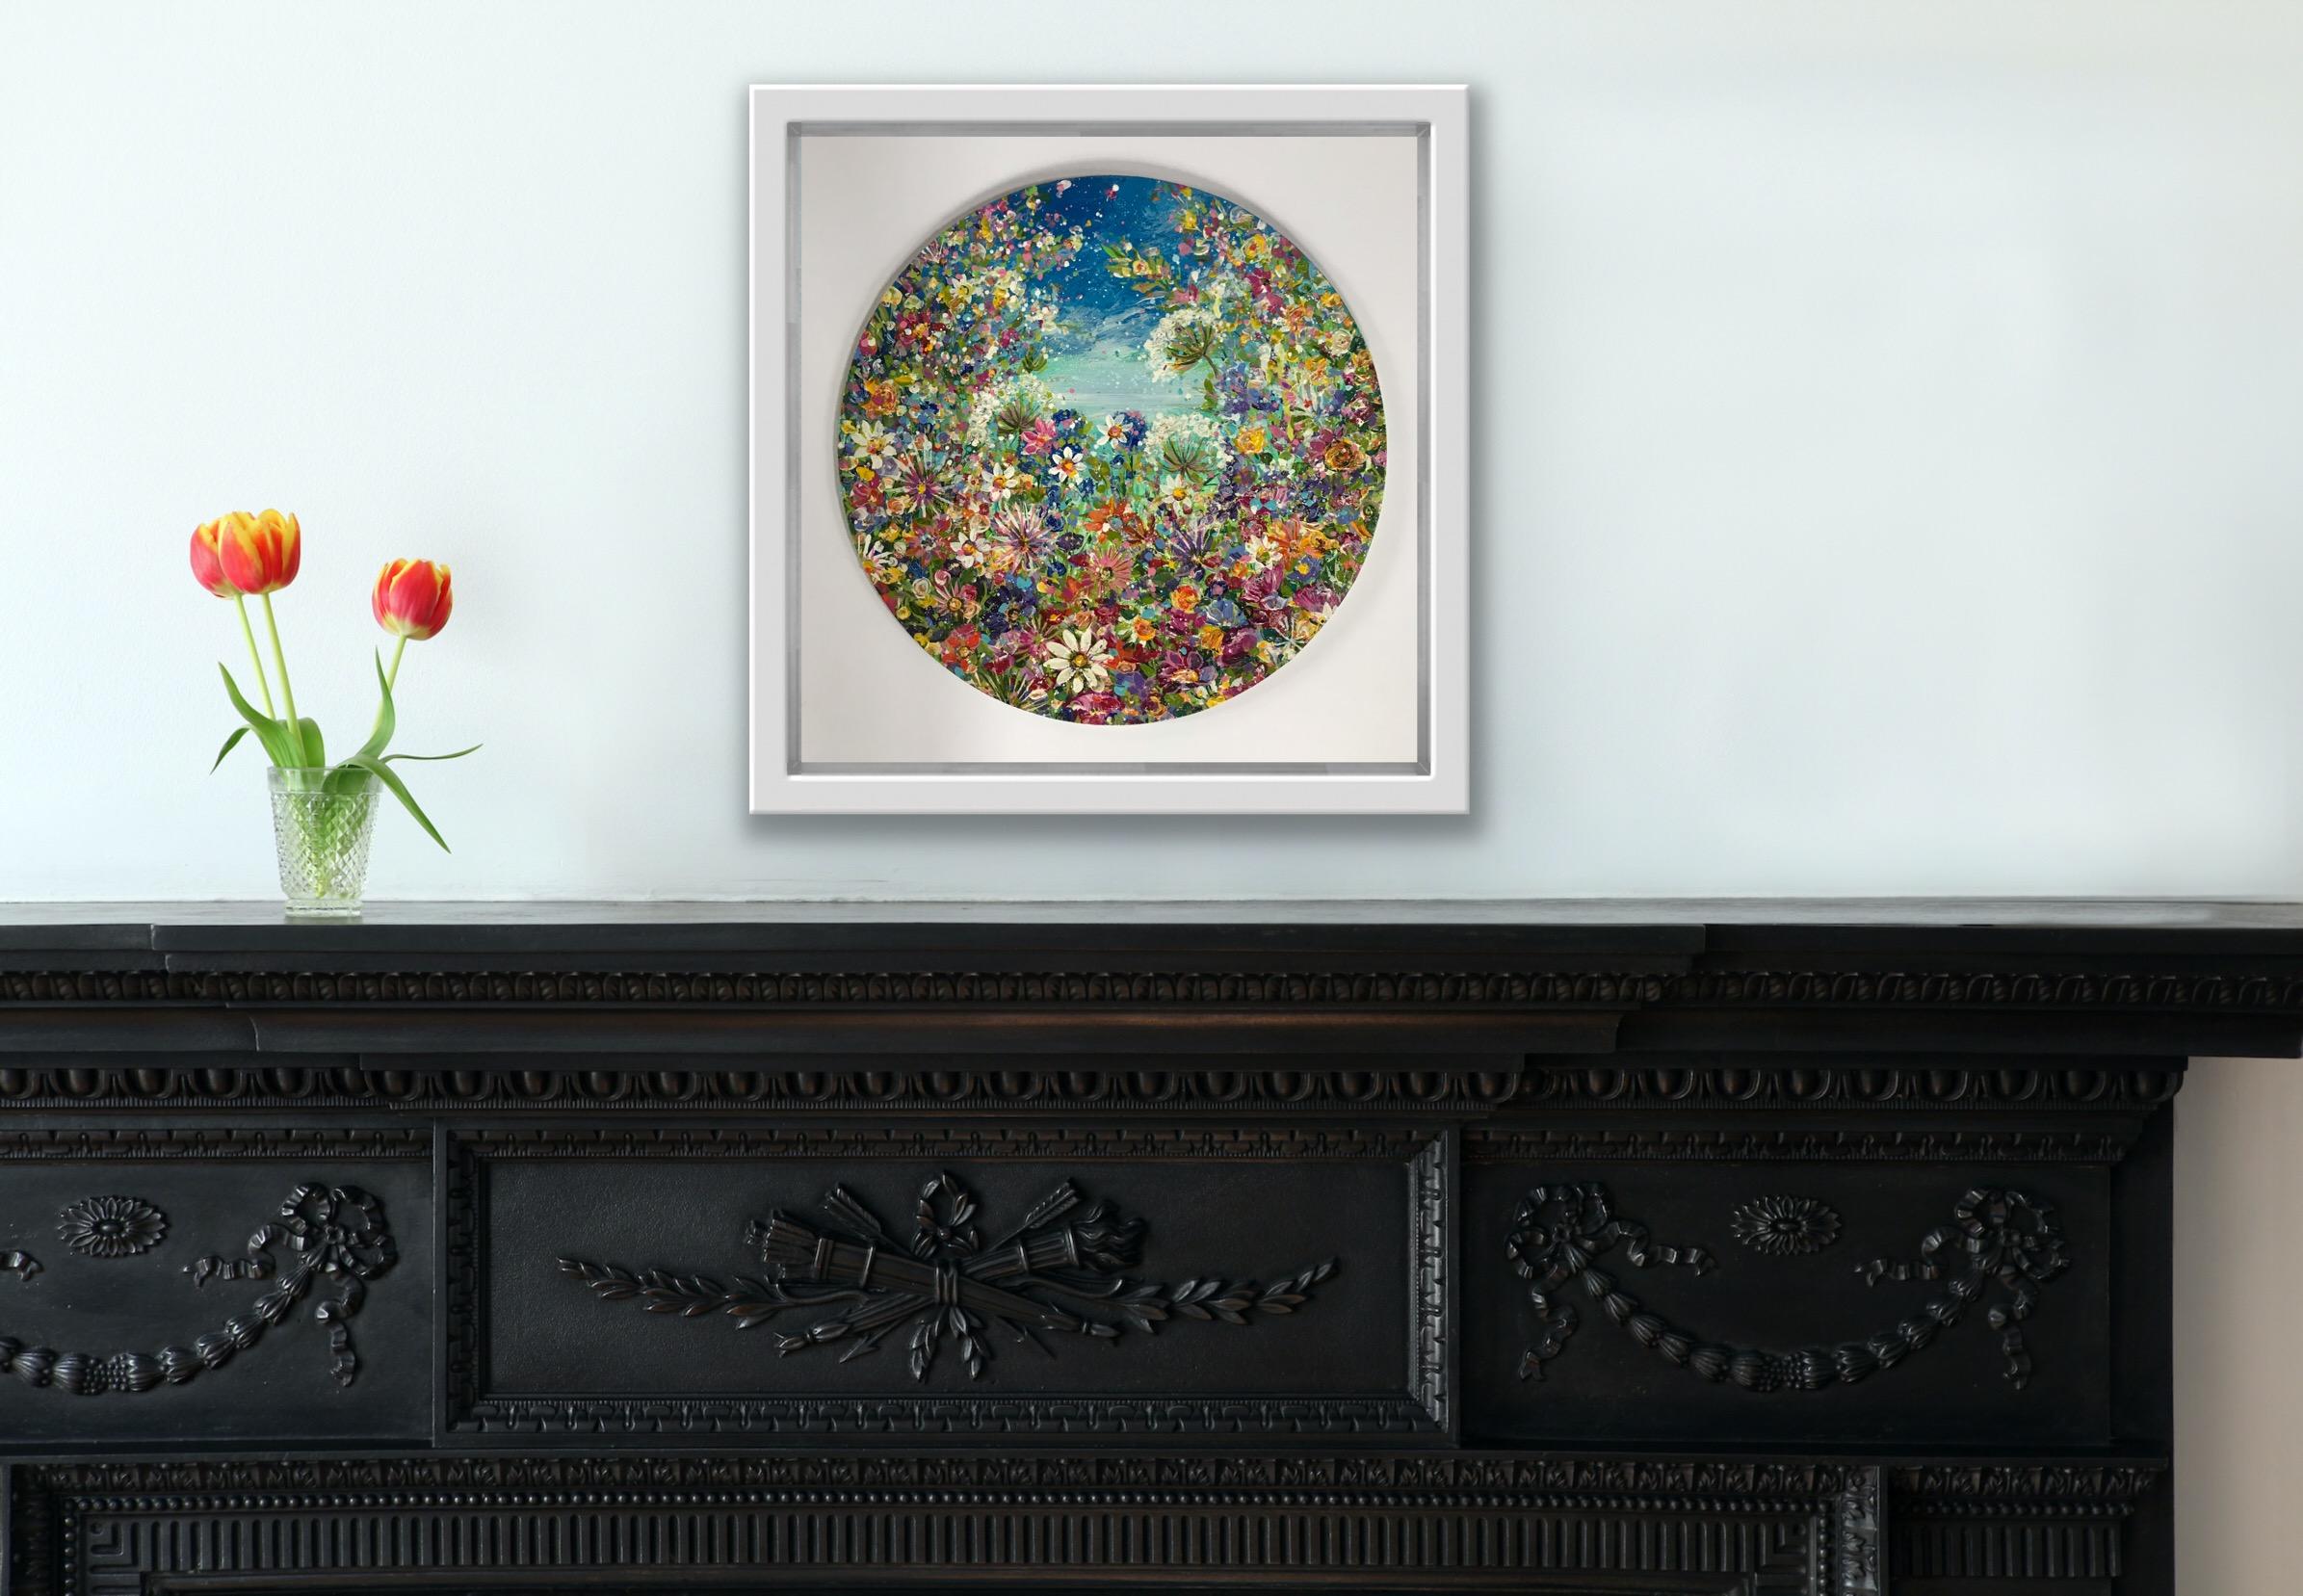 Floral Joy by Jan Rogers [2022]

original
Acrylic on board
Image size: H:30 cm x W:30 cm
Complete Size of Unframed Work: H:30 cm x W:30 cm x D:0.2cm
Sold Unframed
Please note that insitu images are purely an indication of how a piece may